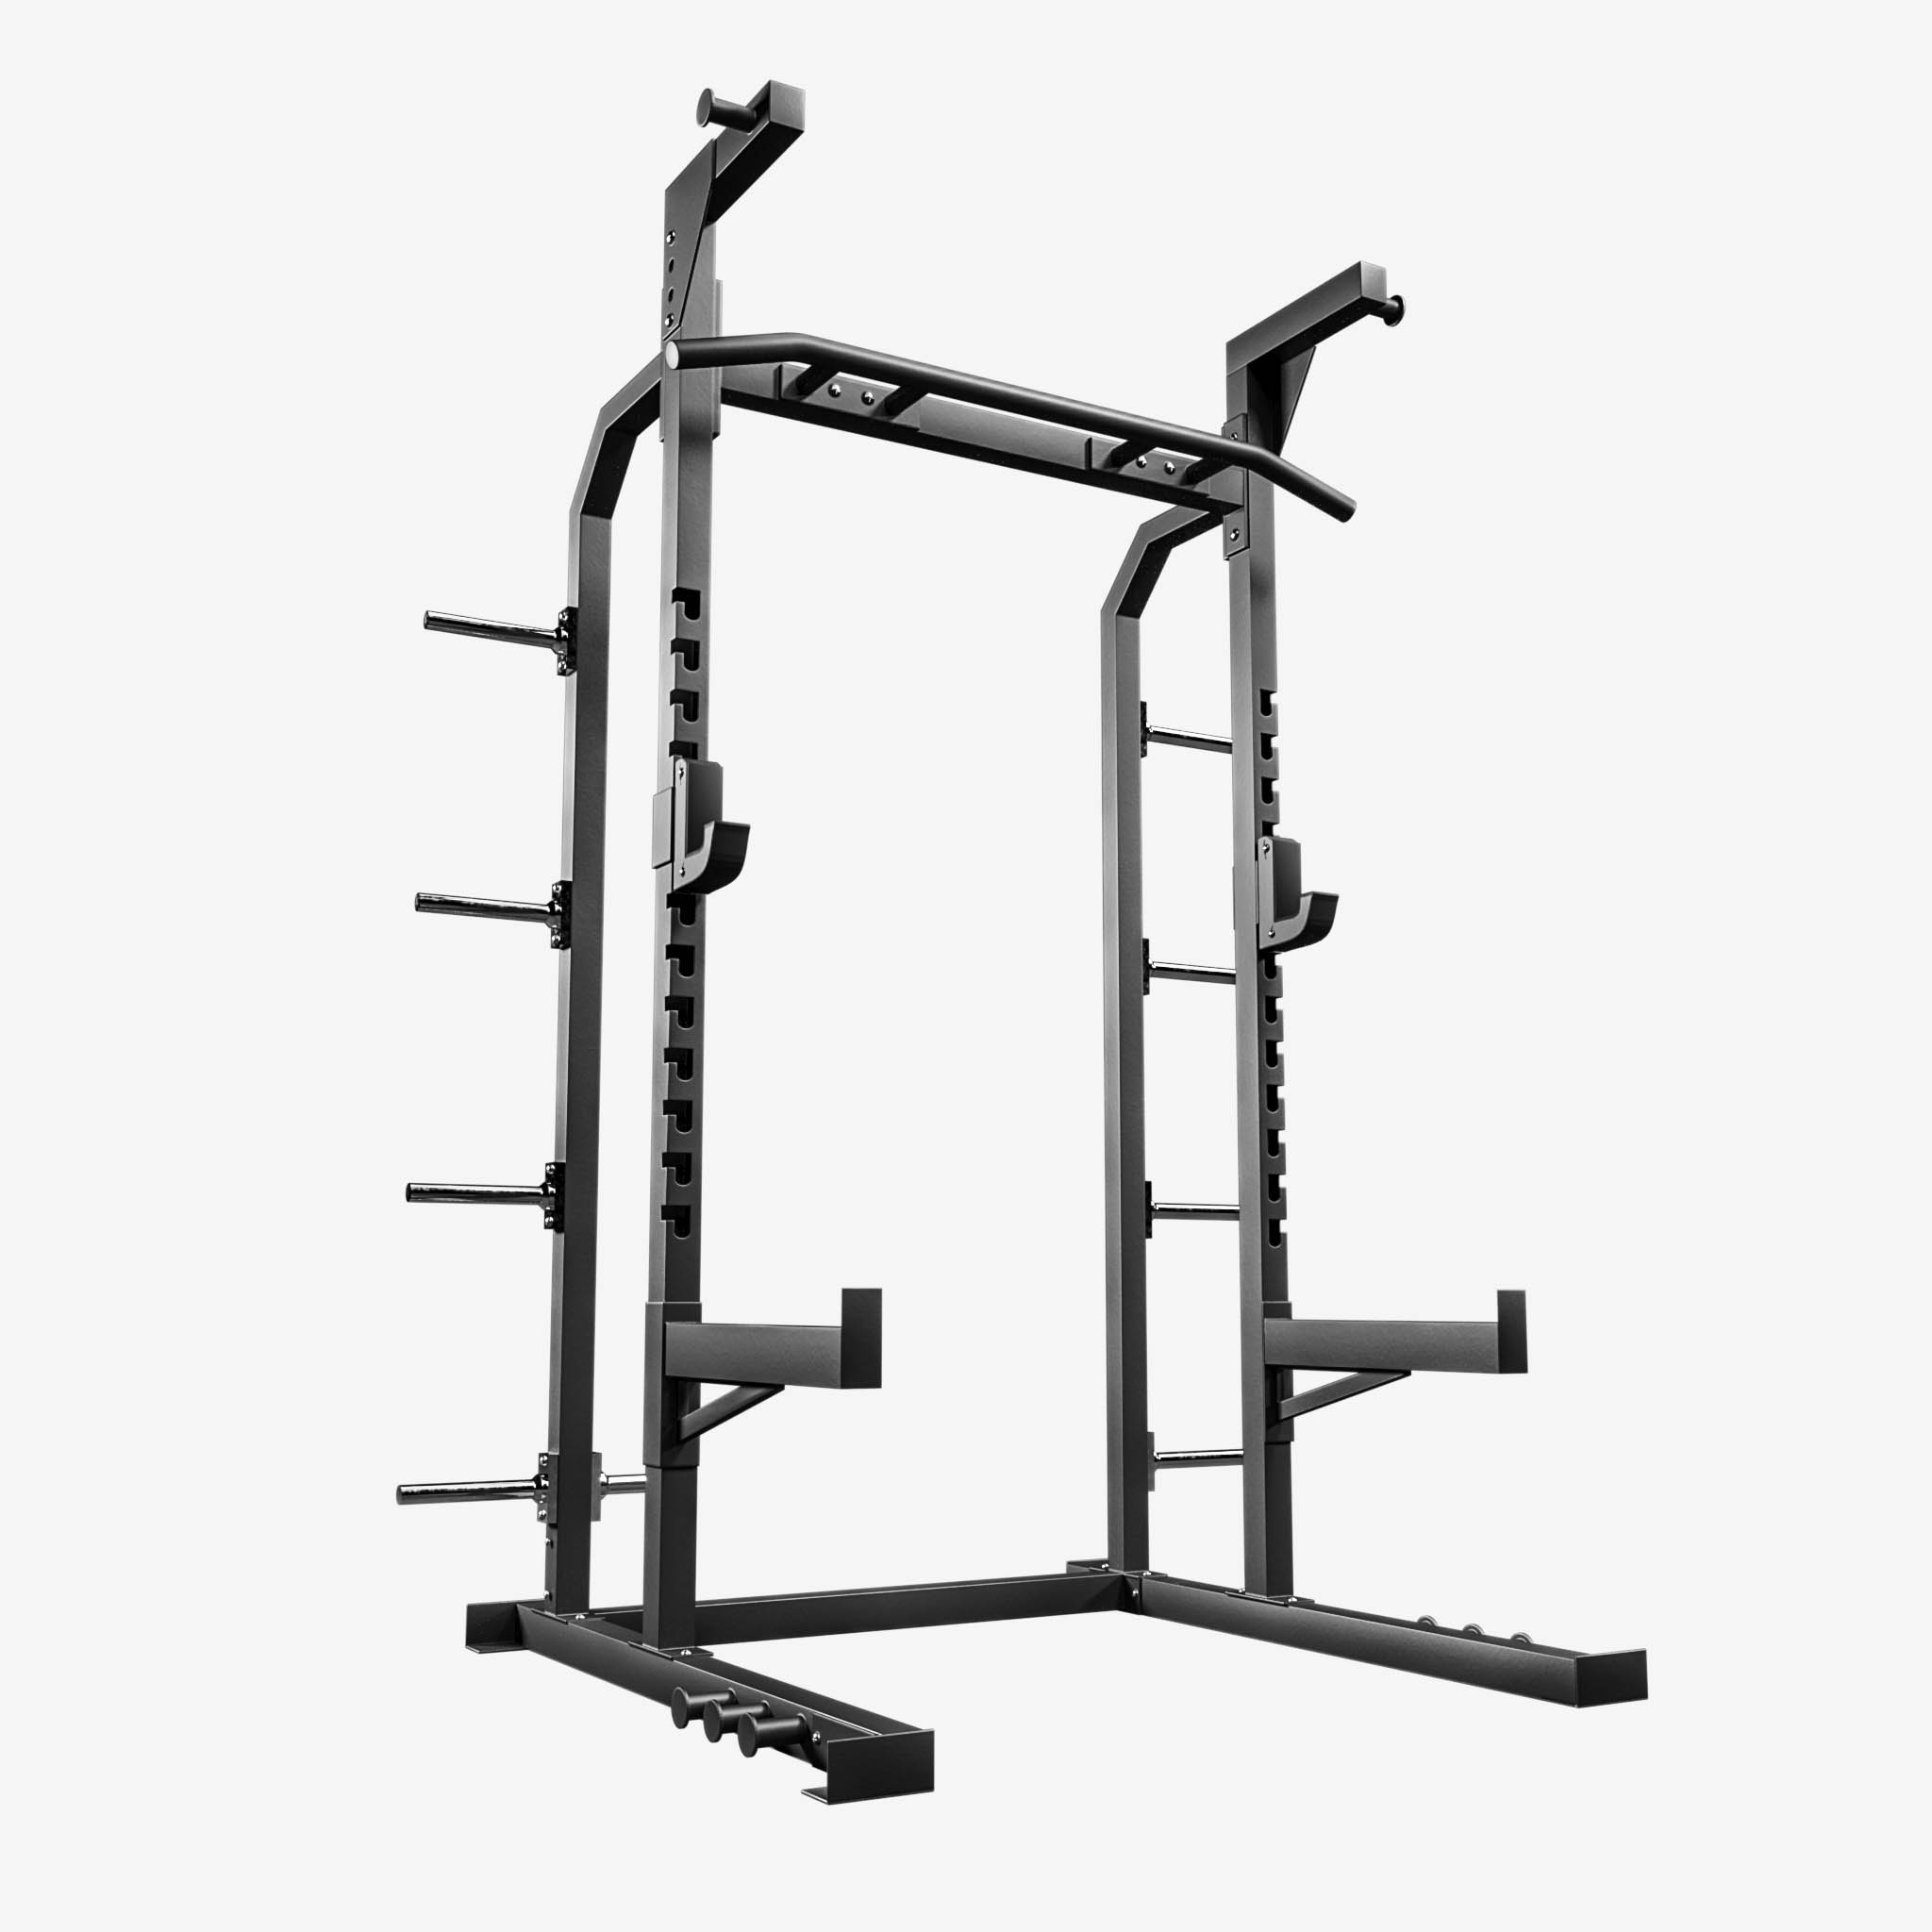 Featured image for “HD Half Rack MK3”